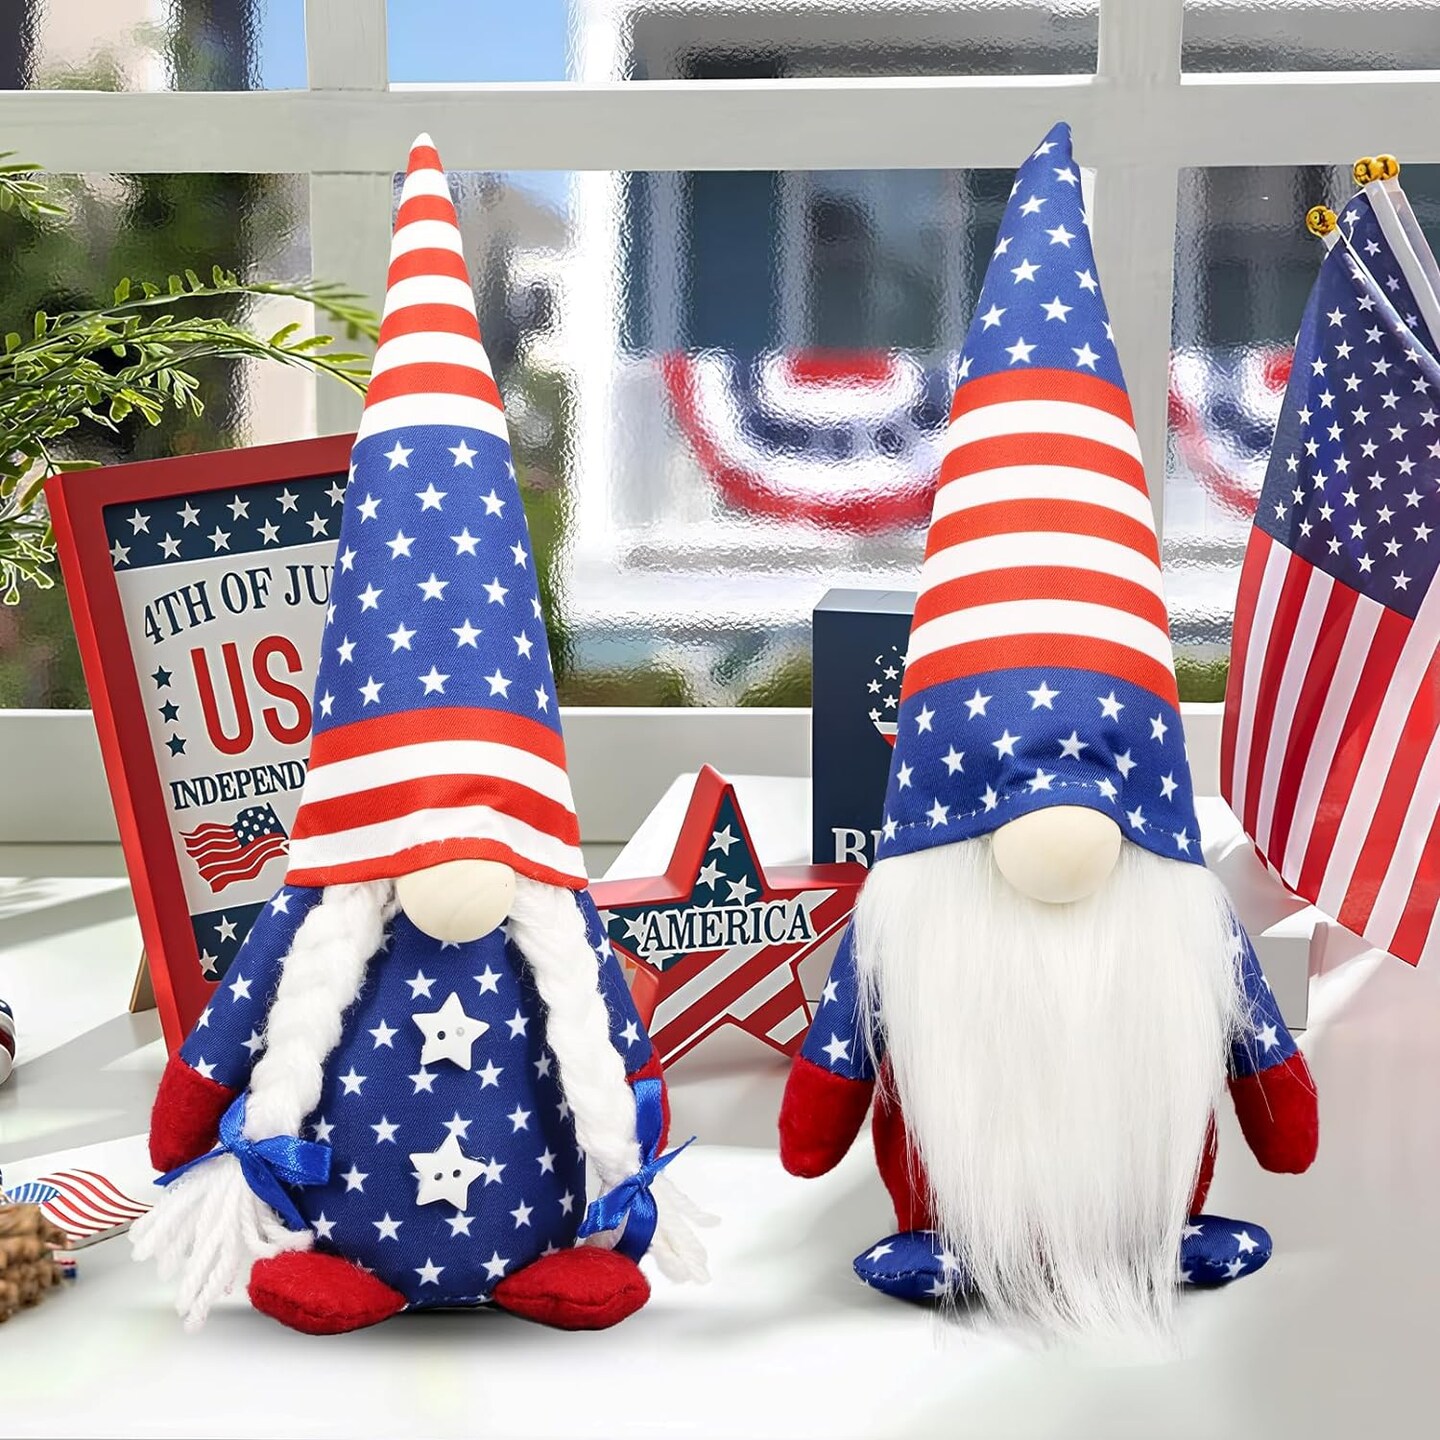 4th of July Decorations - Patriotic Gnomes Decorations for Home